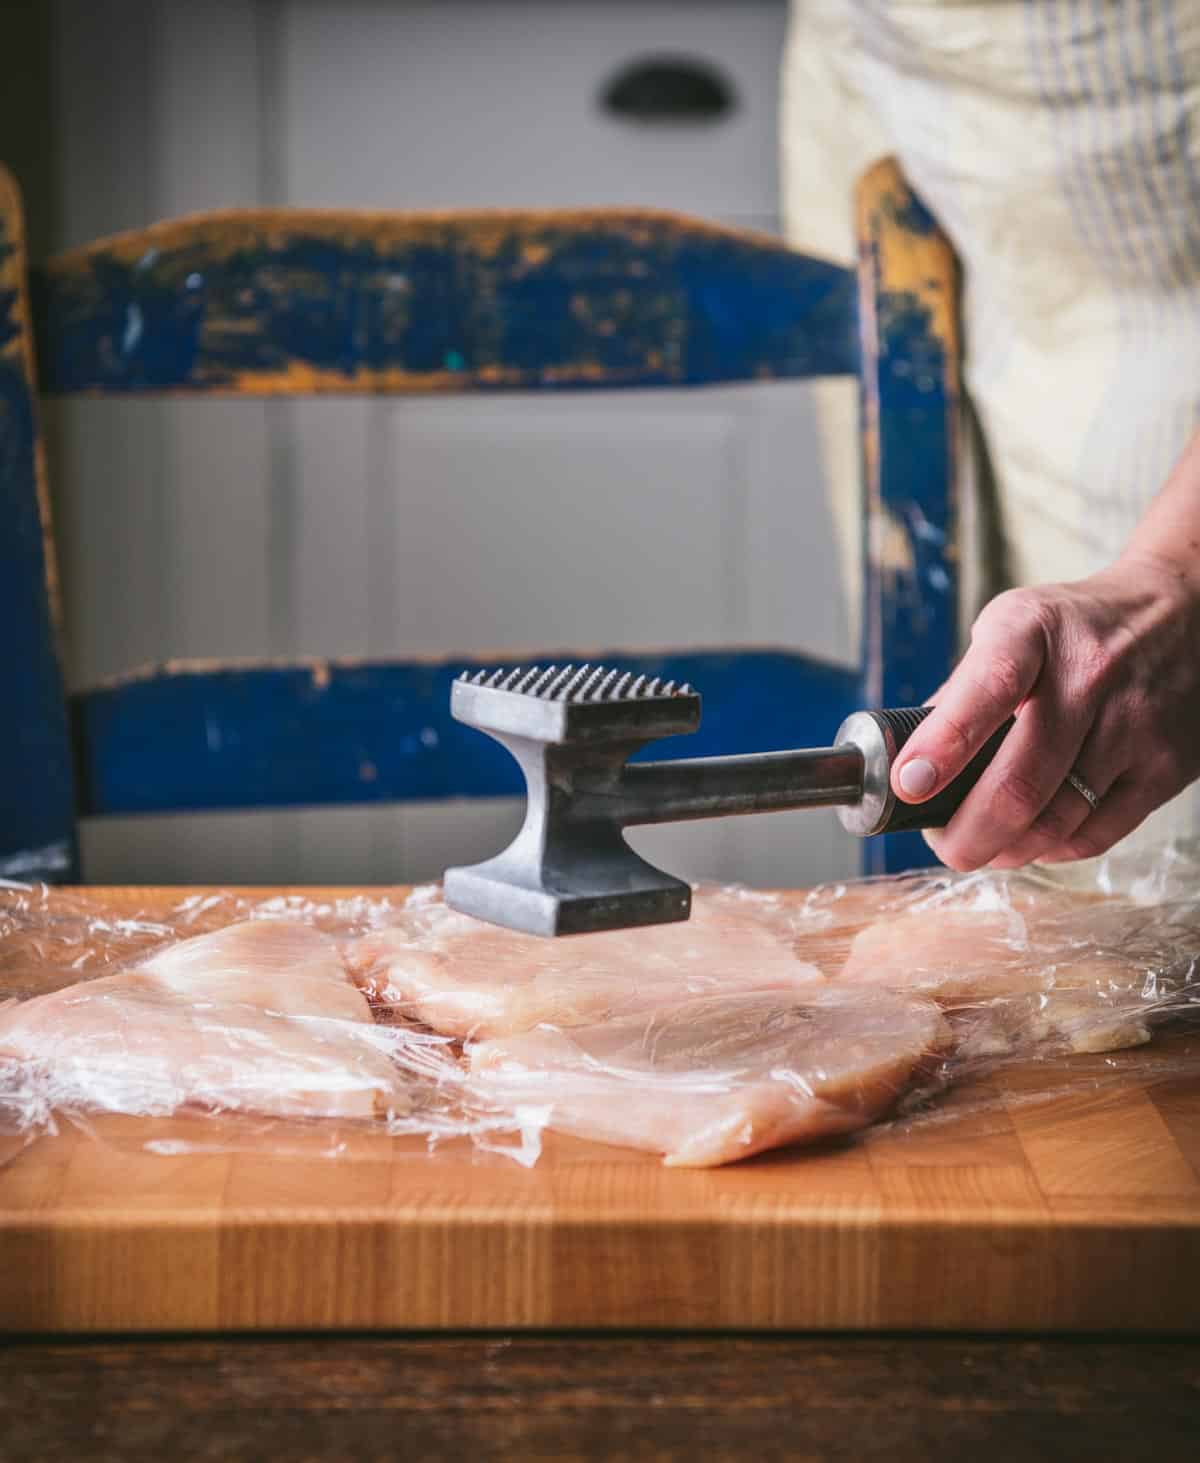 Pounding chicken breast flat with a meat mallet.